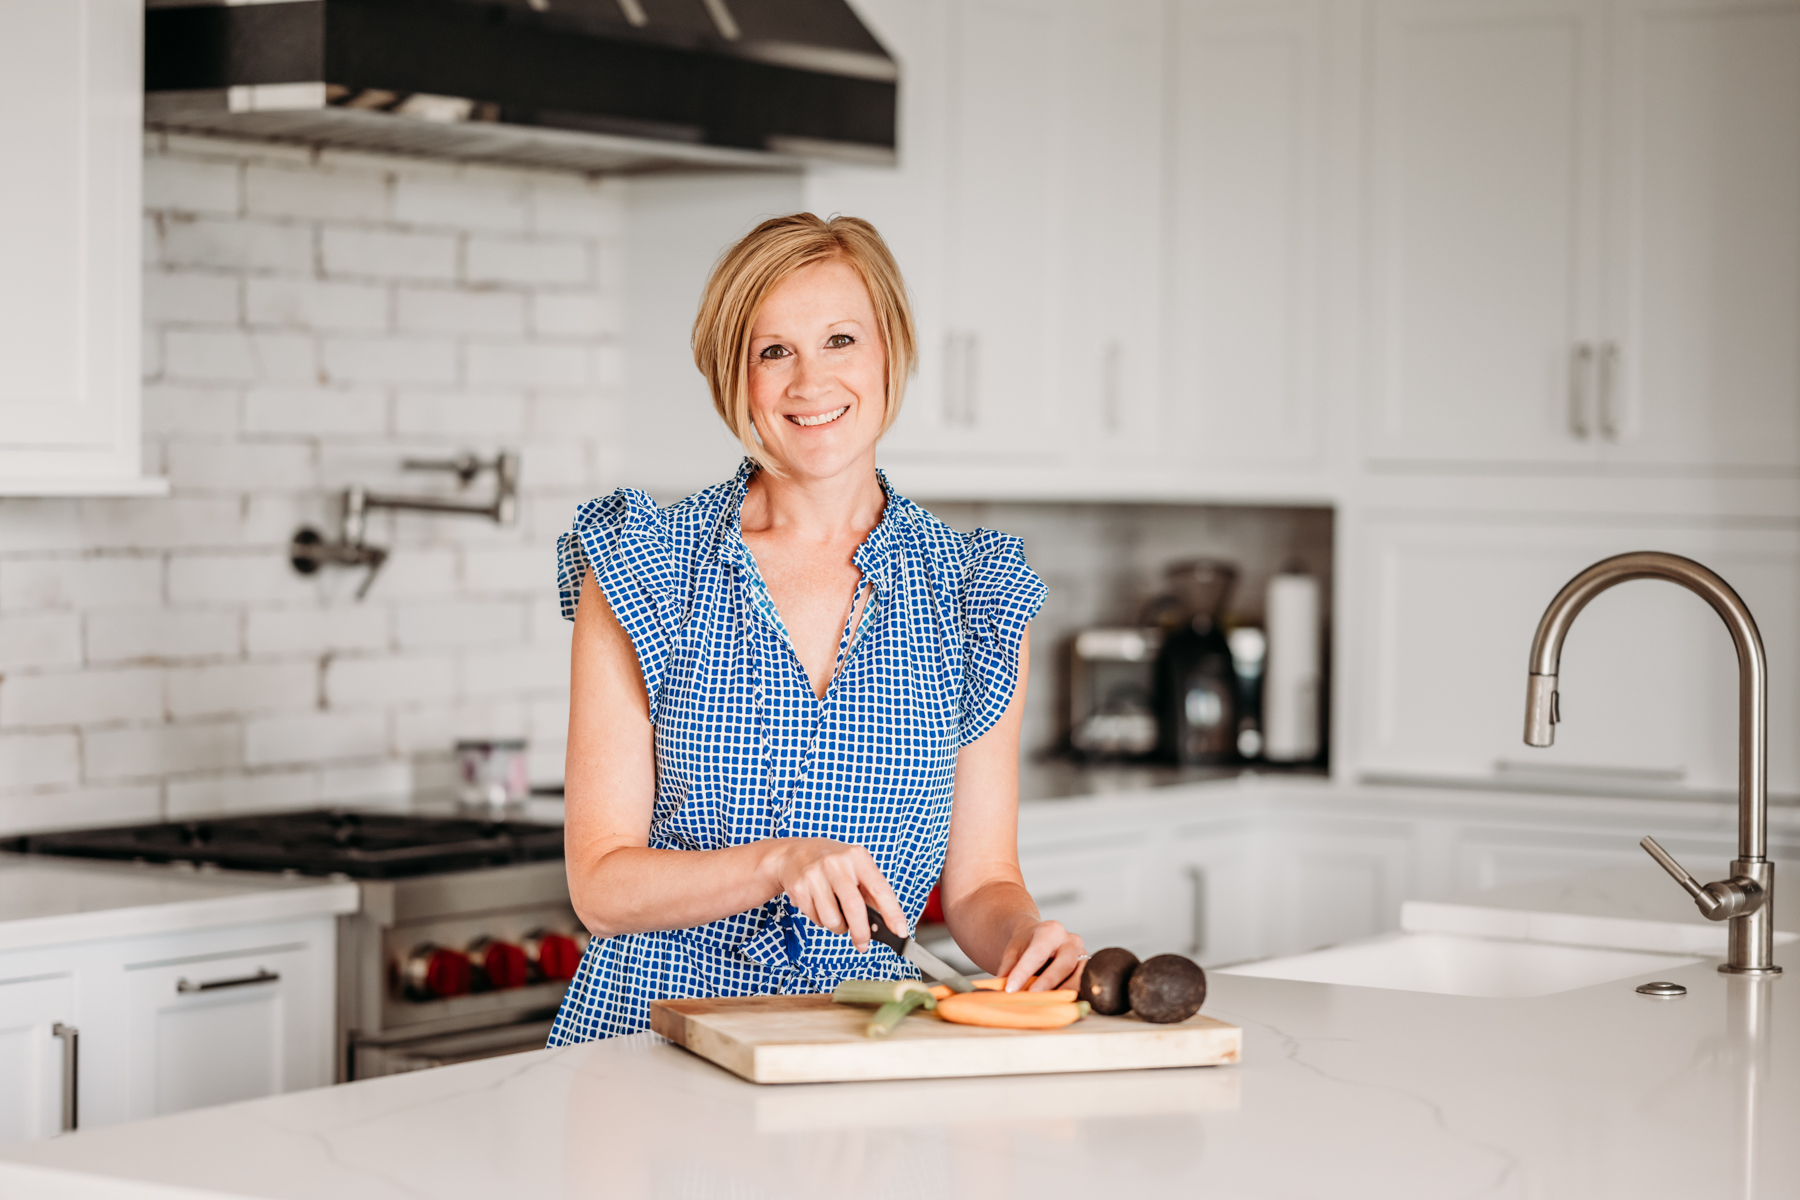 Casual dietician and nutritionist headshot and brand photography by Jenny Sessoms in North Virginia.